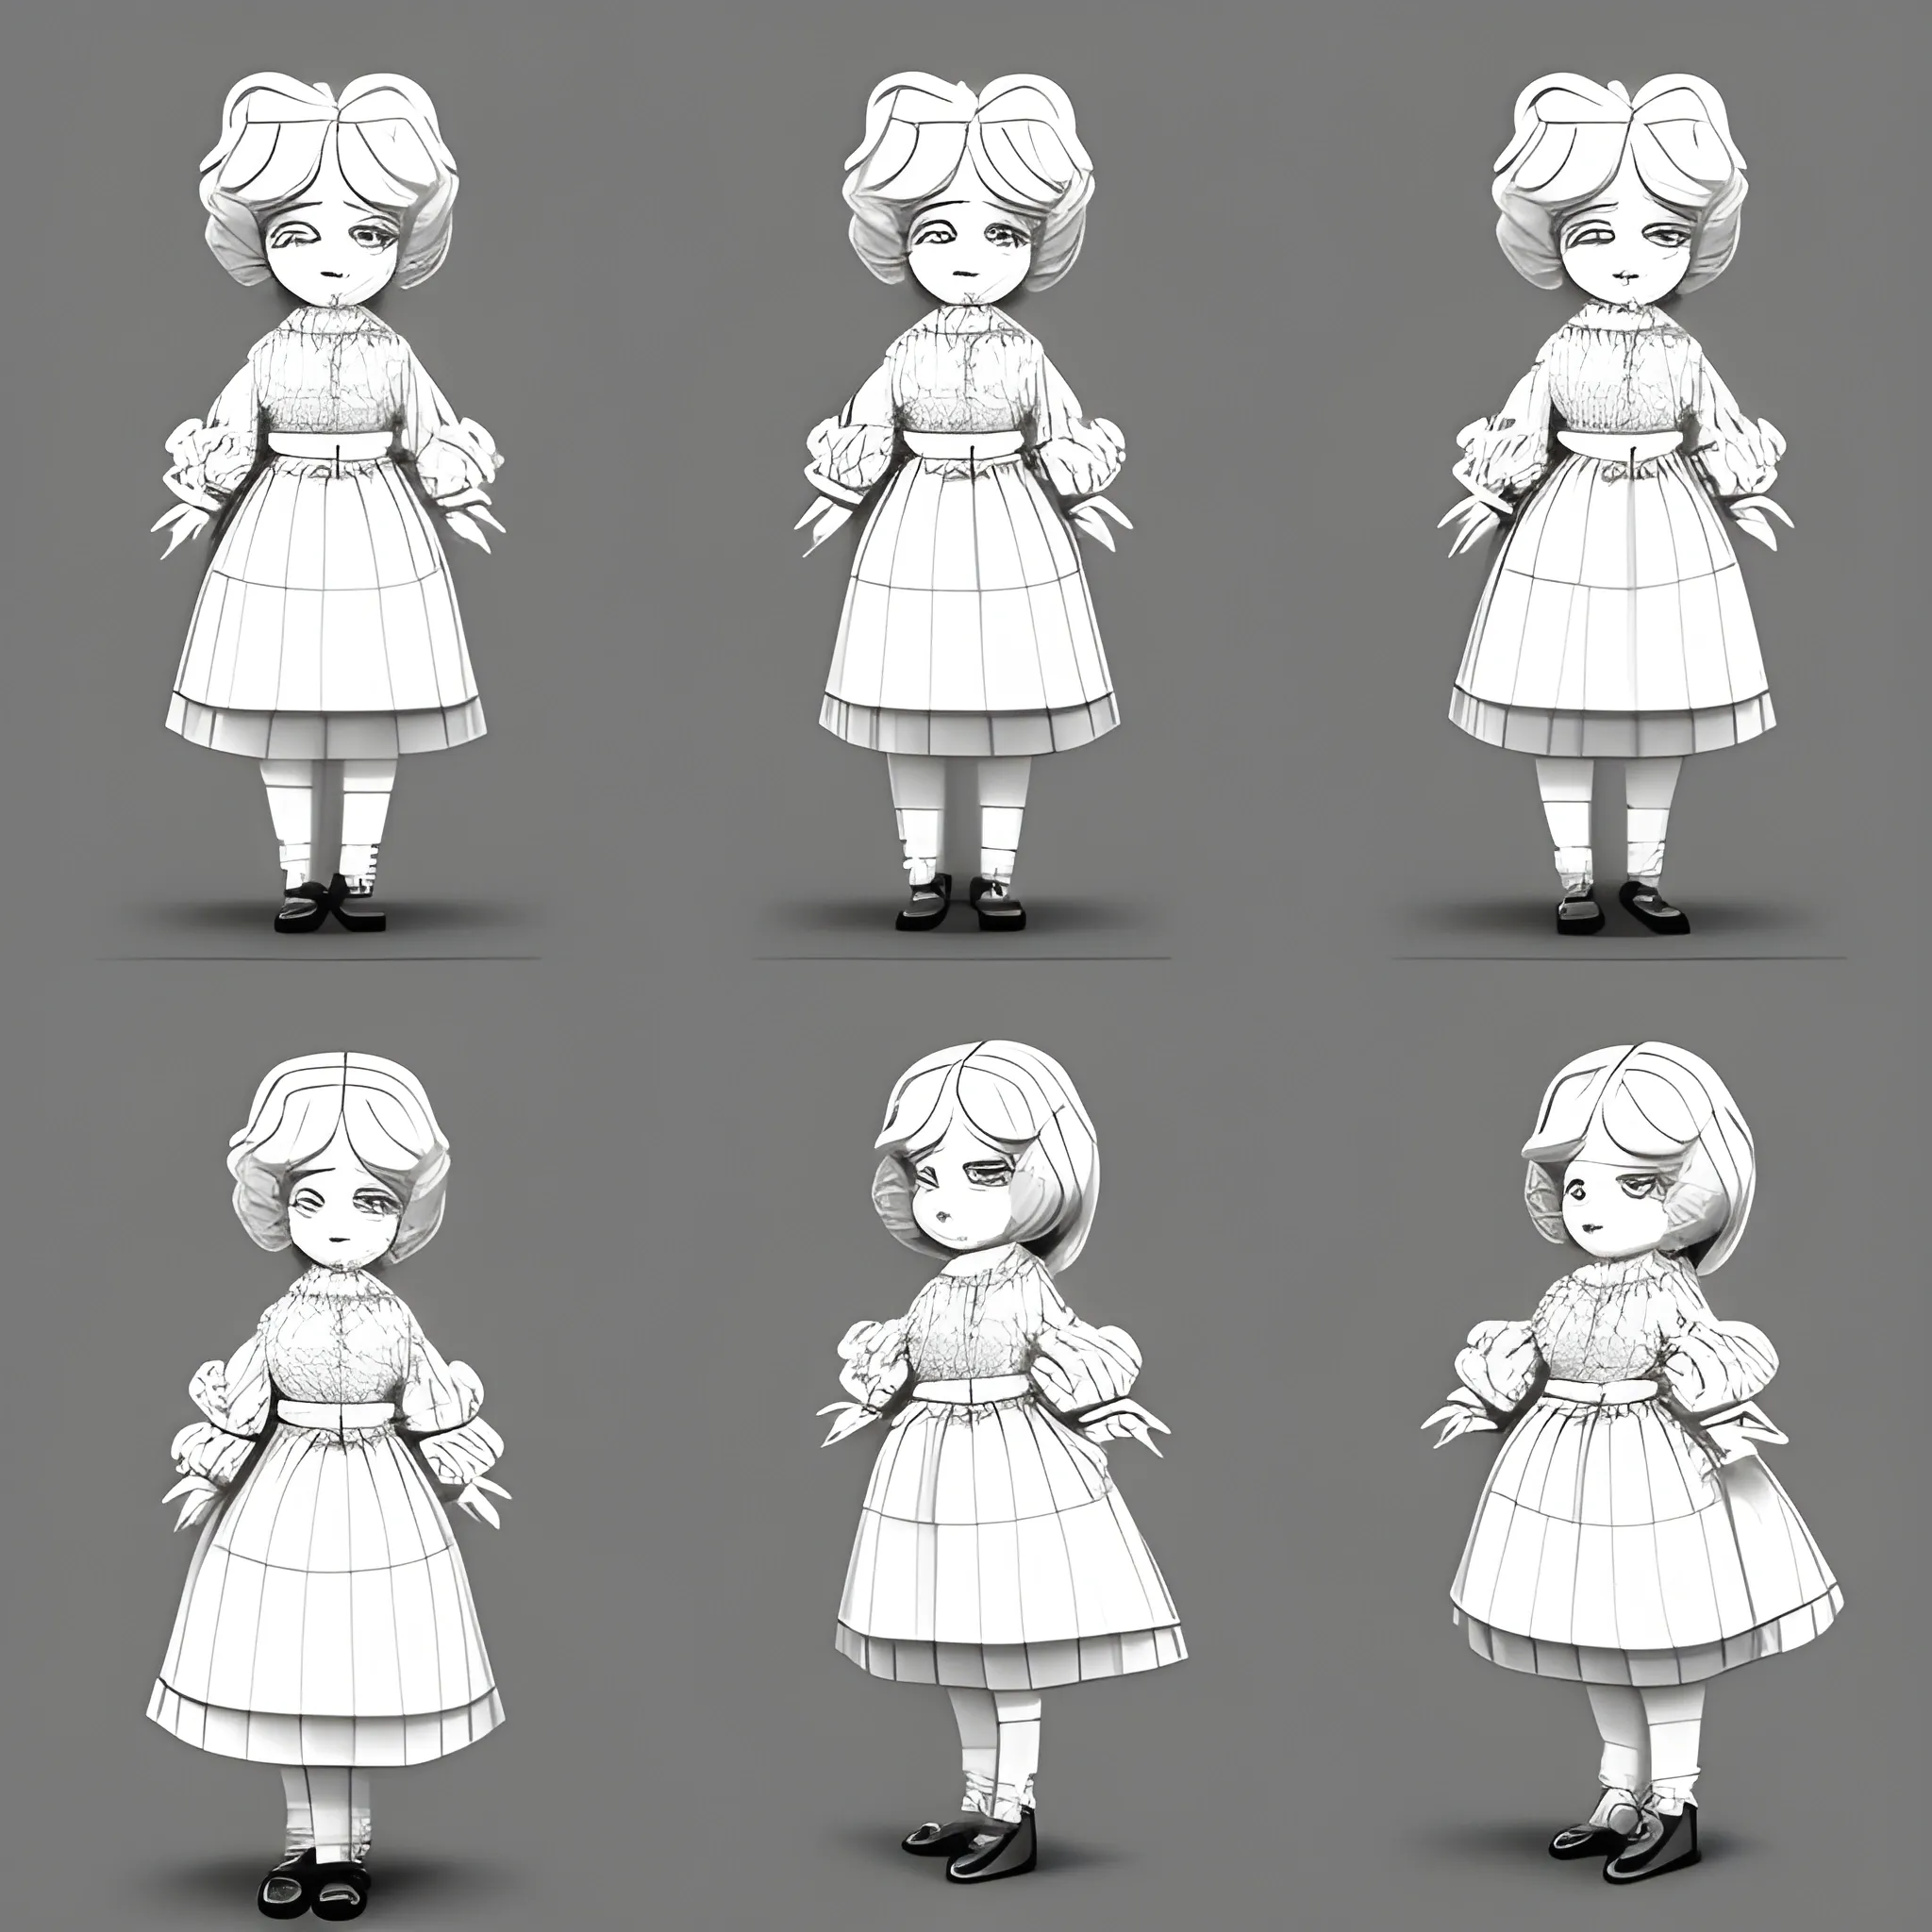 character sheet, cute cartoon victorian doll in different poses and angles, Pencil Sketch, 3D